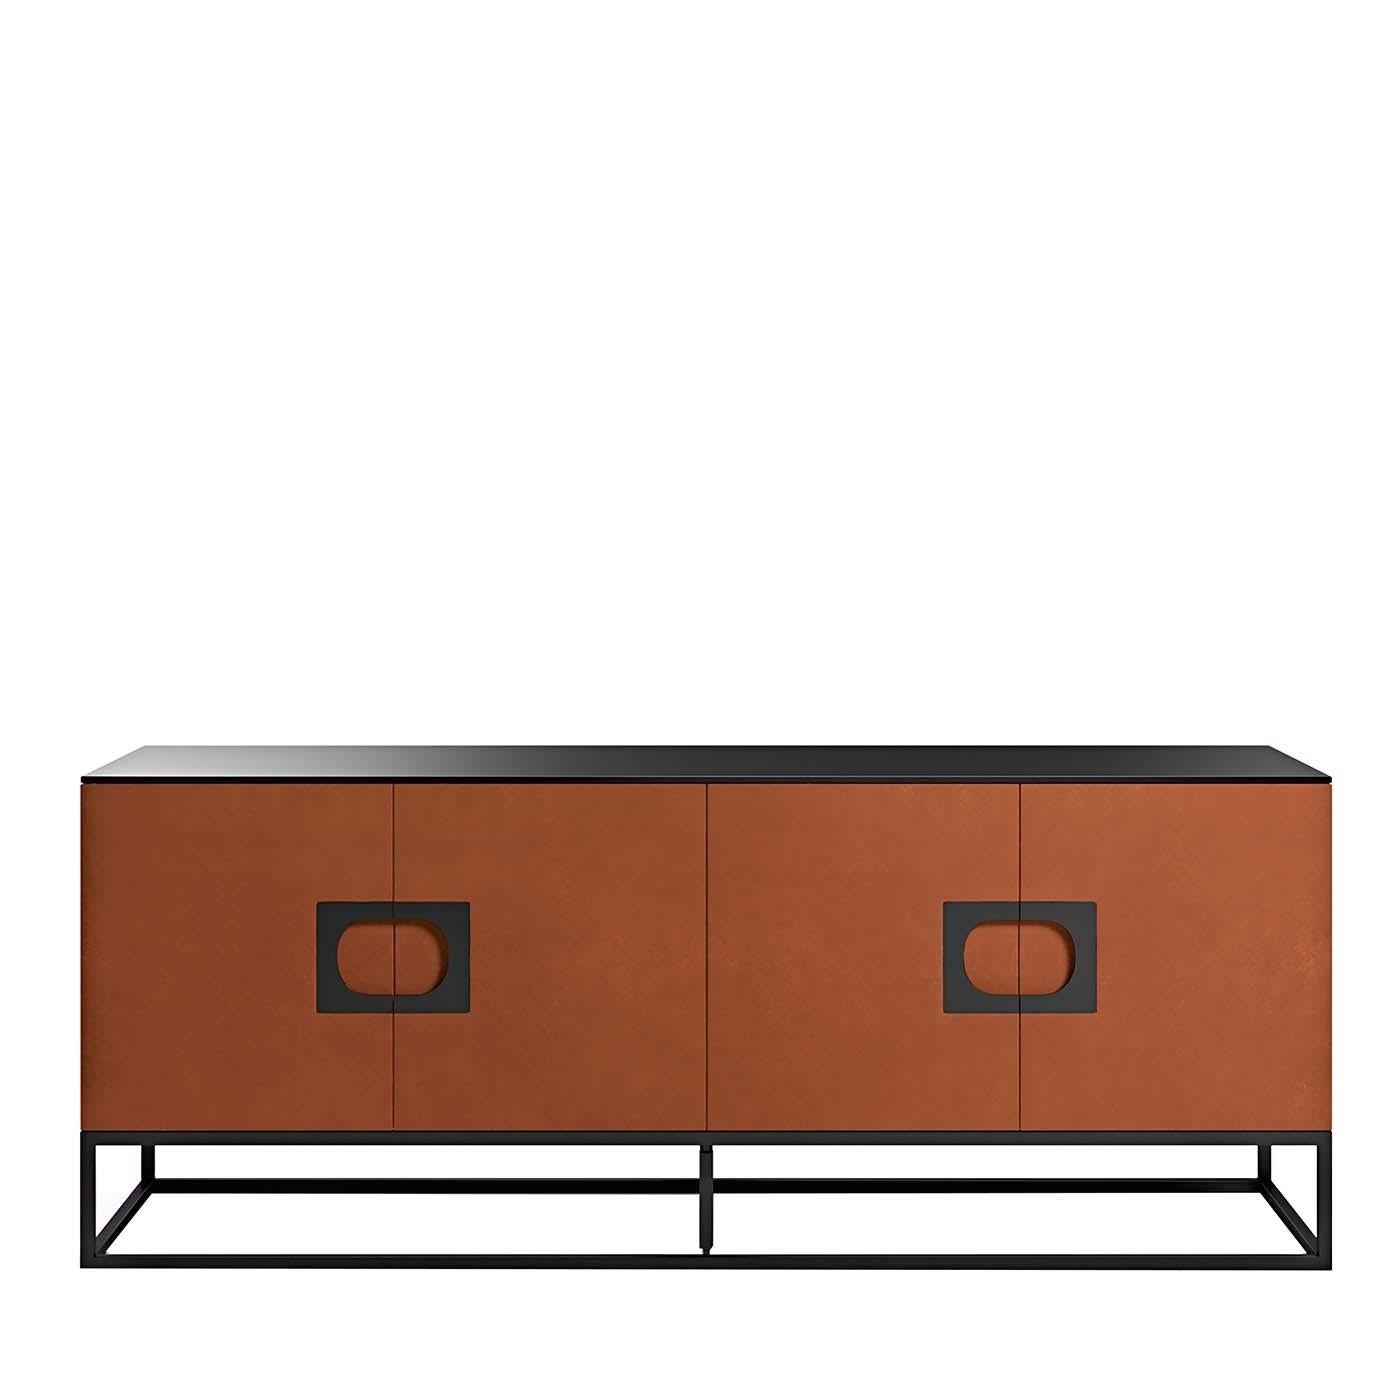 A splendid piece of plush sophistication, this sideboard will elevate the look of a living room, especially if matched to the Mystique bar cabinet. A superb combination of refined materials, it rests on a matte-black lacquered steel structure and